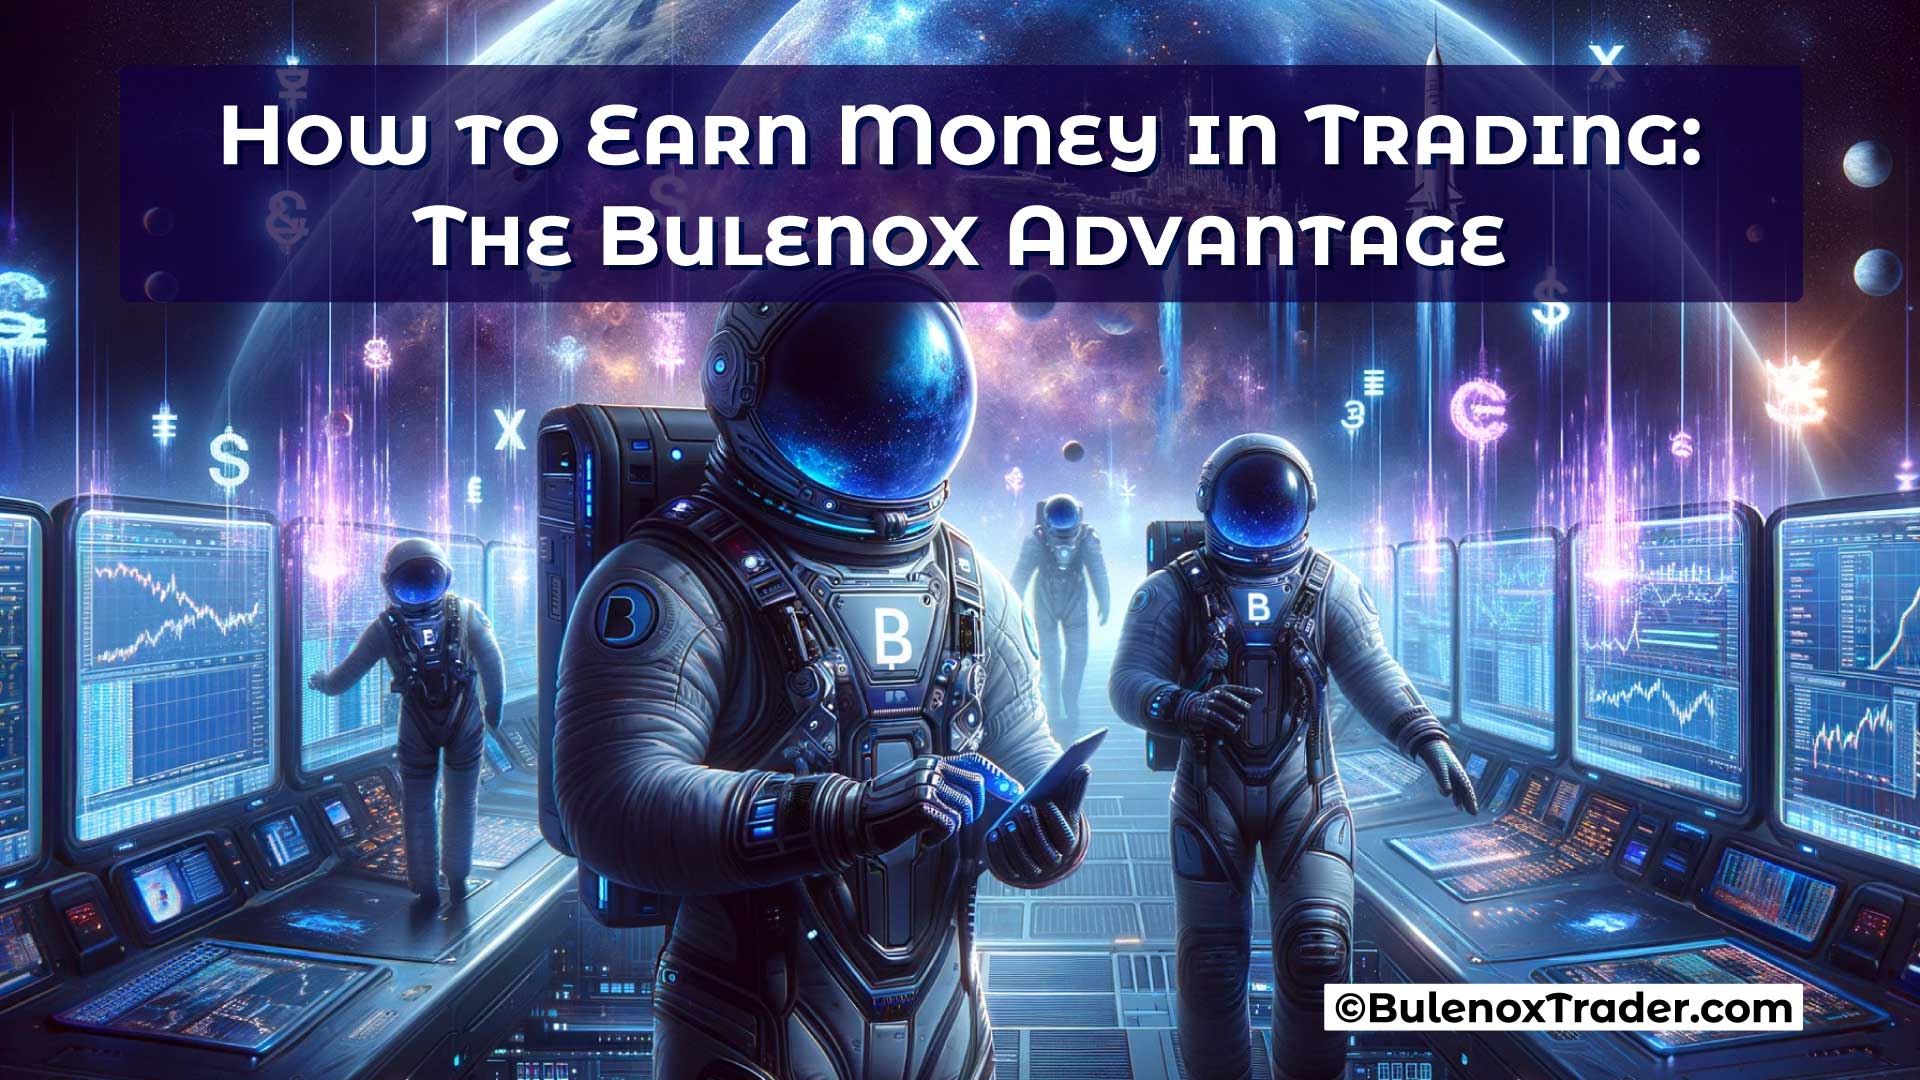 How-to-Earn-Money-in-Trading-The-Bulenox-Advantage-on-Bulenox-Trader-Website